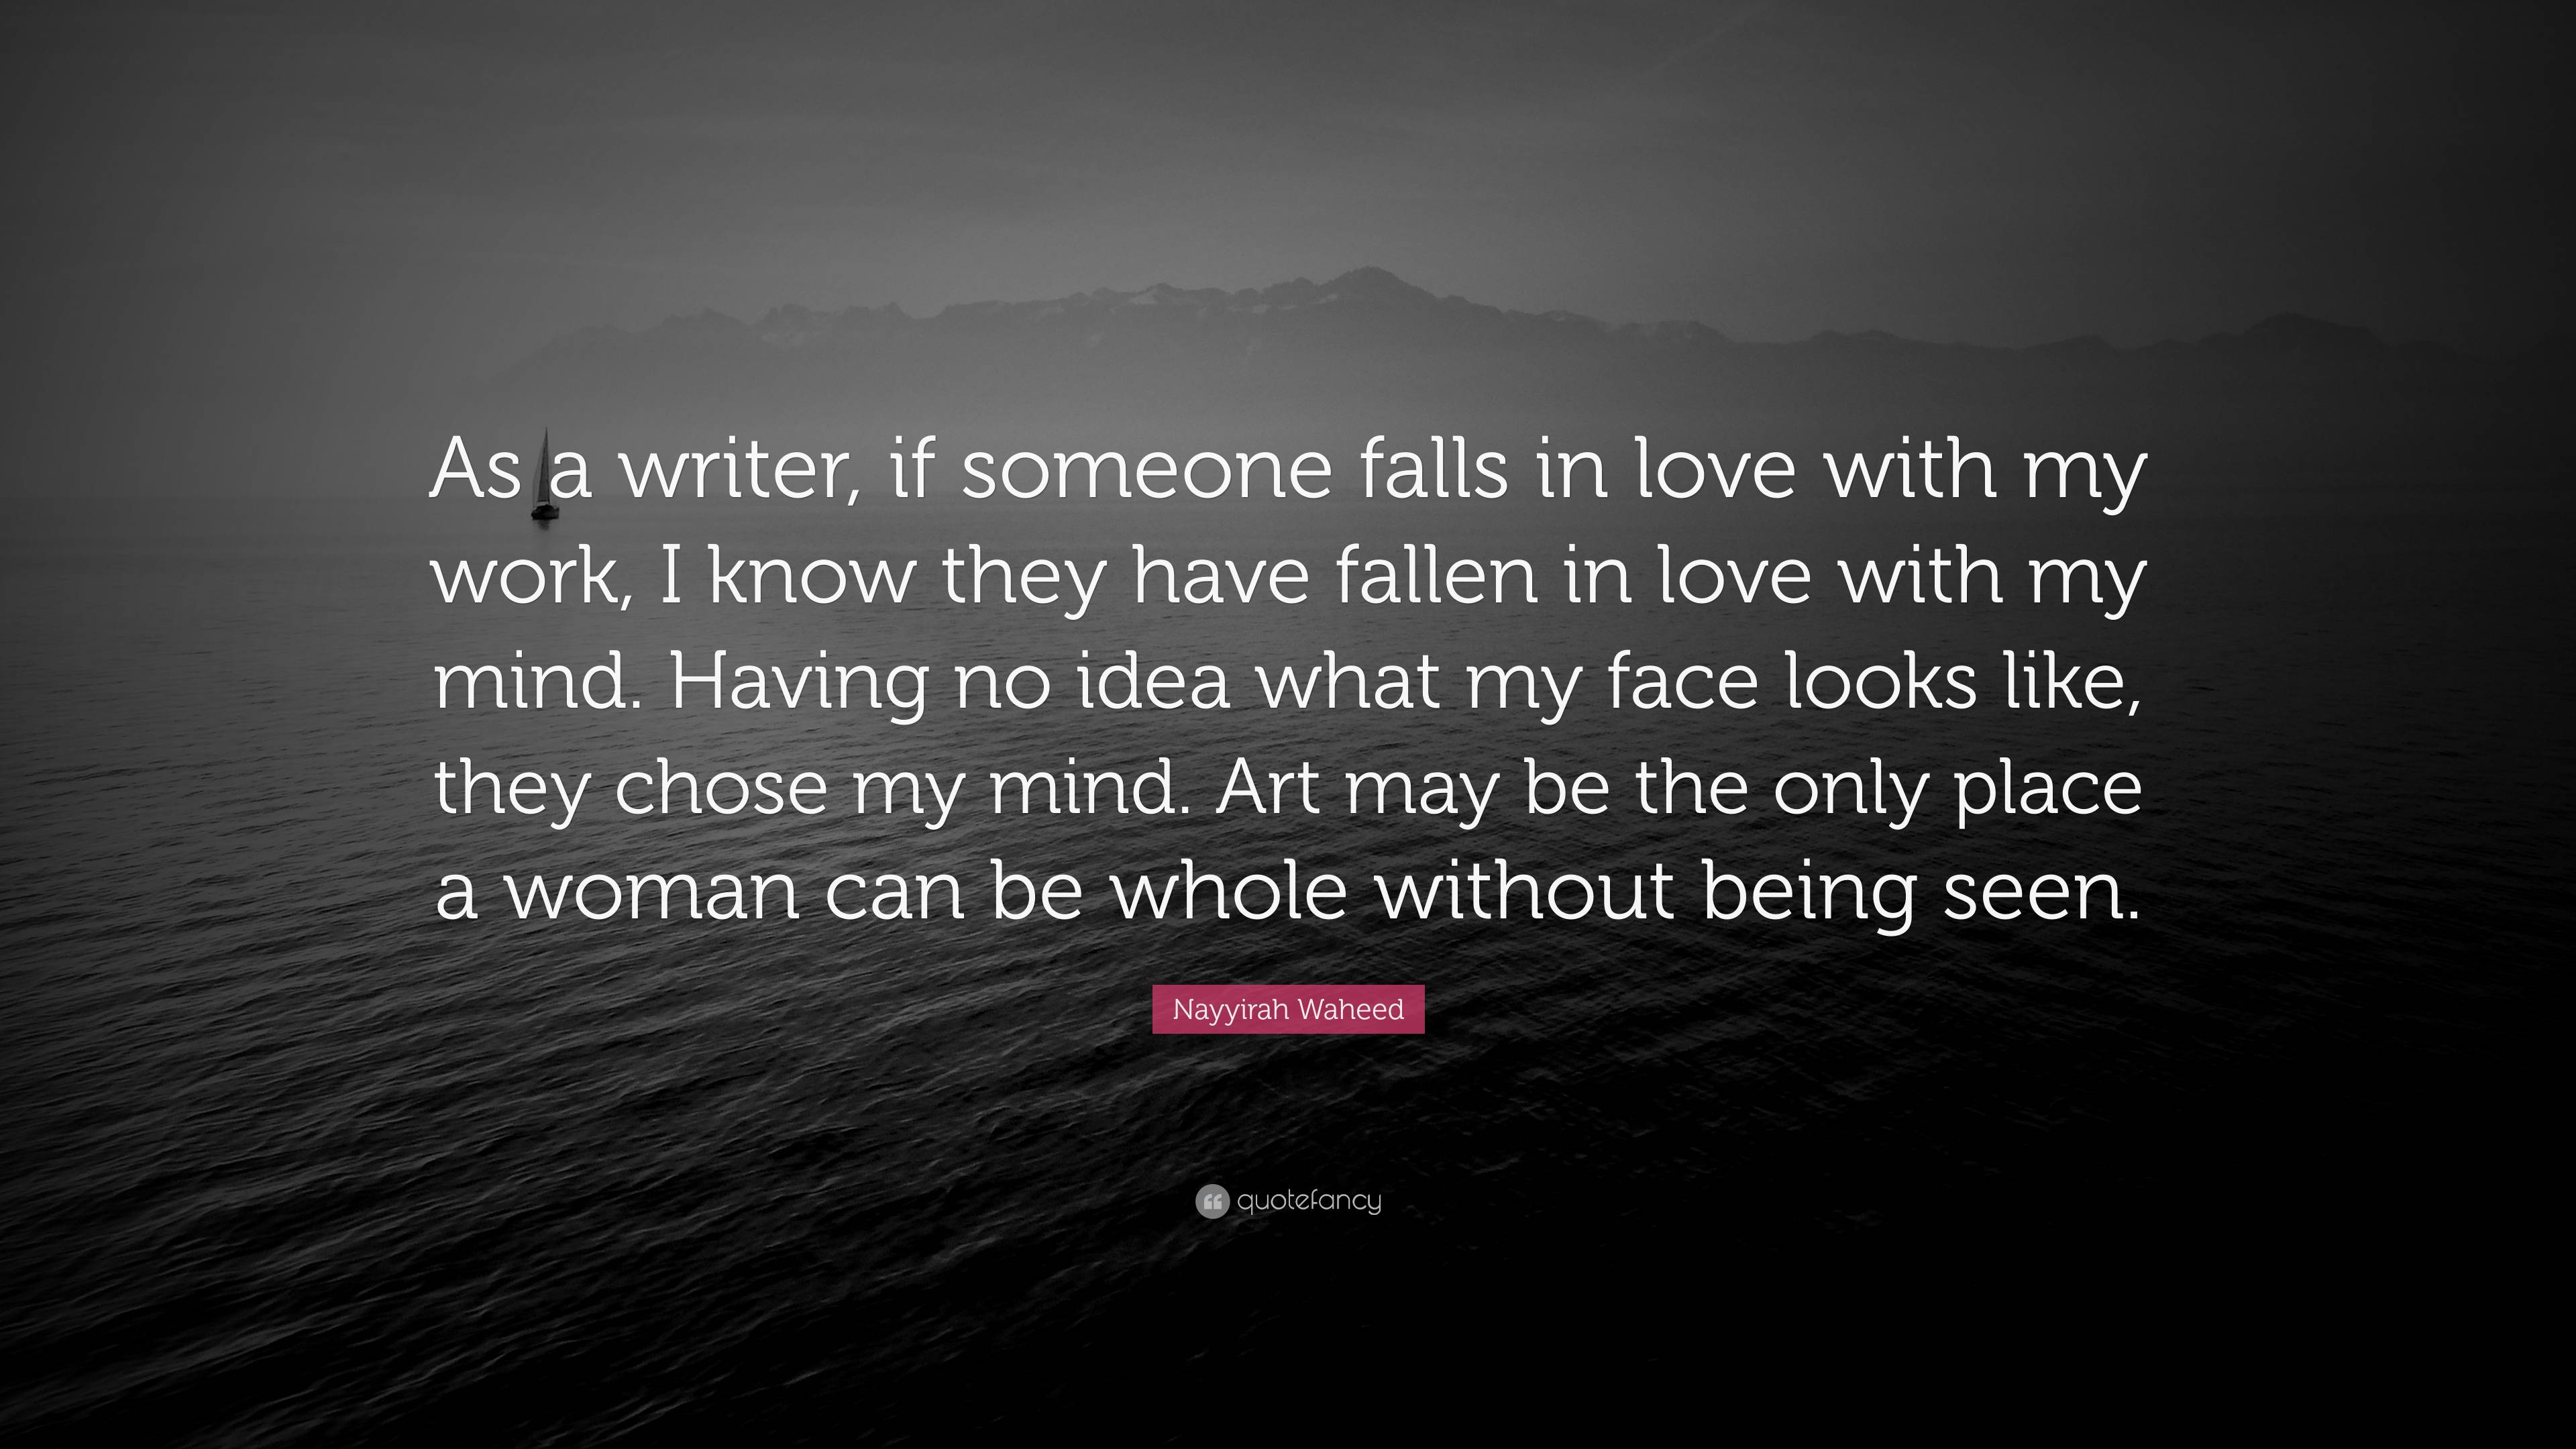 Nayyirah Waheed Quote: “As a writer, if someone falls in love with my ...